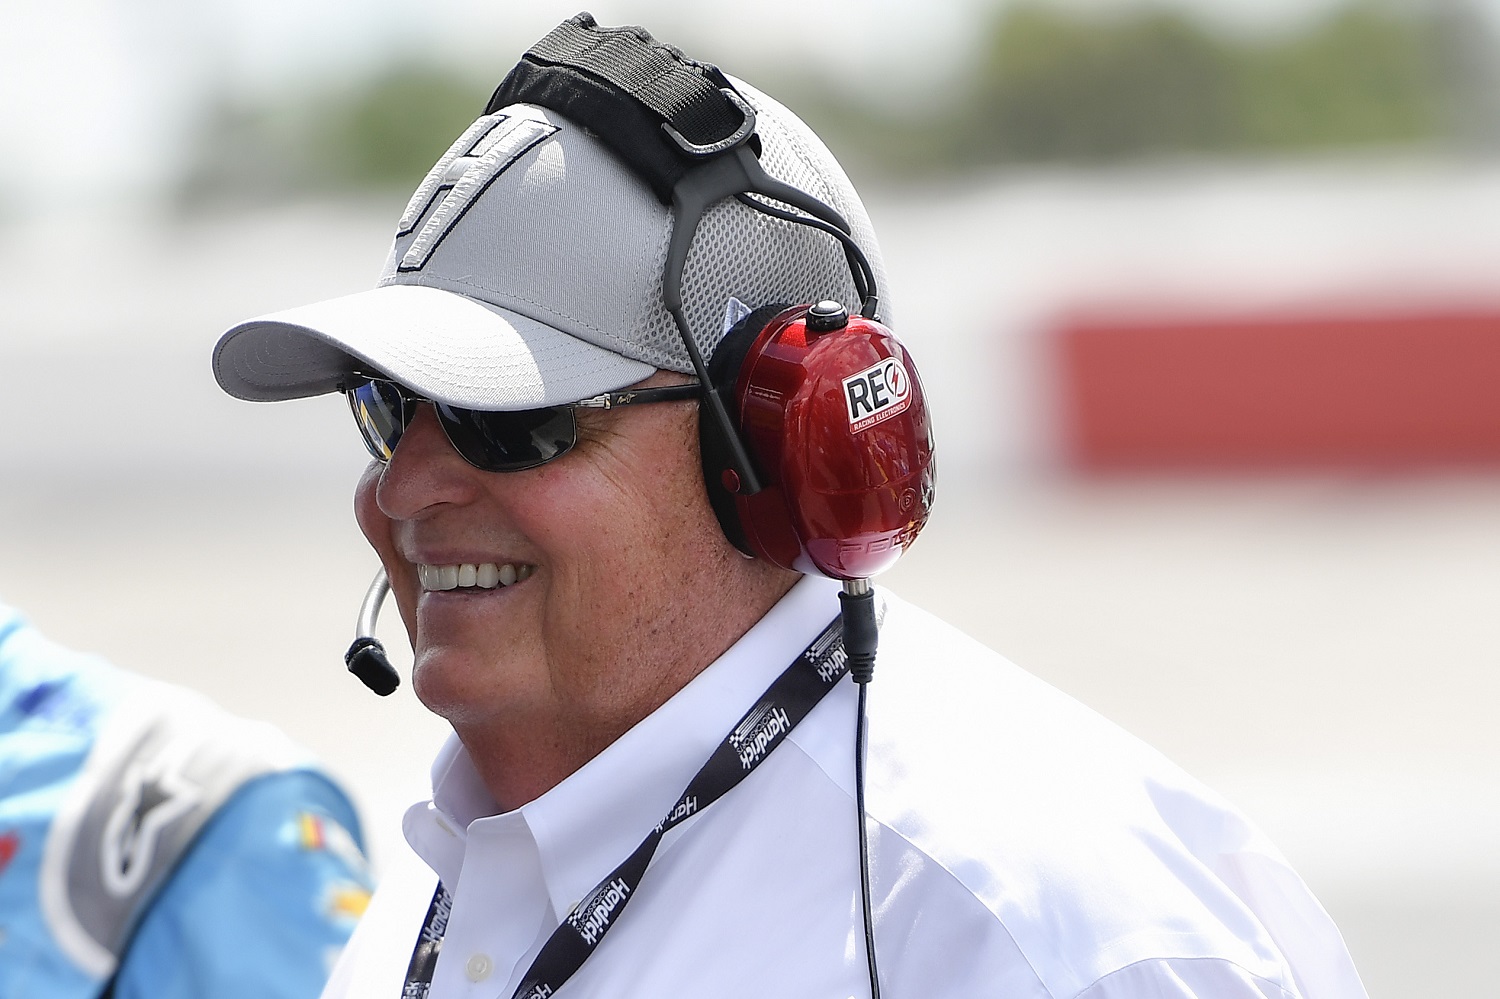 NASCAR Hall of Famer Rick Hendrick looks on during practice for the NASCAR Cup Series Cook Out Southern 500 at Darlington Raceway on Sept. 3, 2022. | Logan Riely/Getty Images